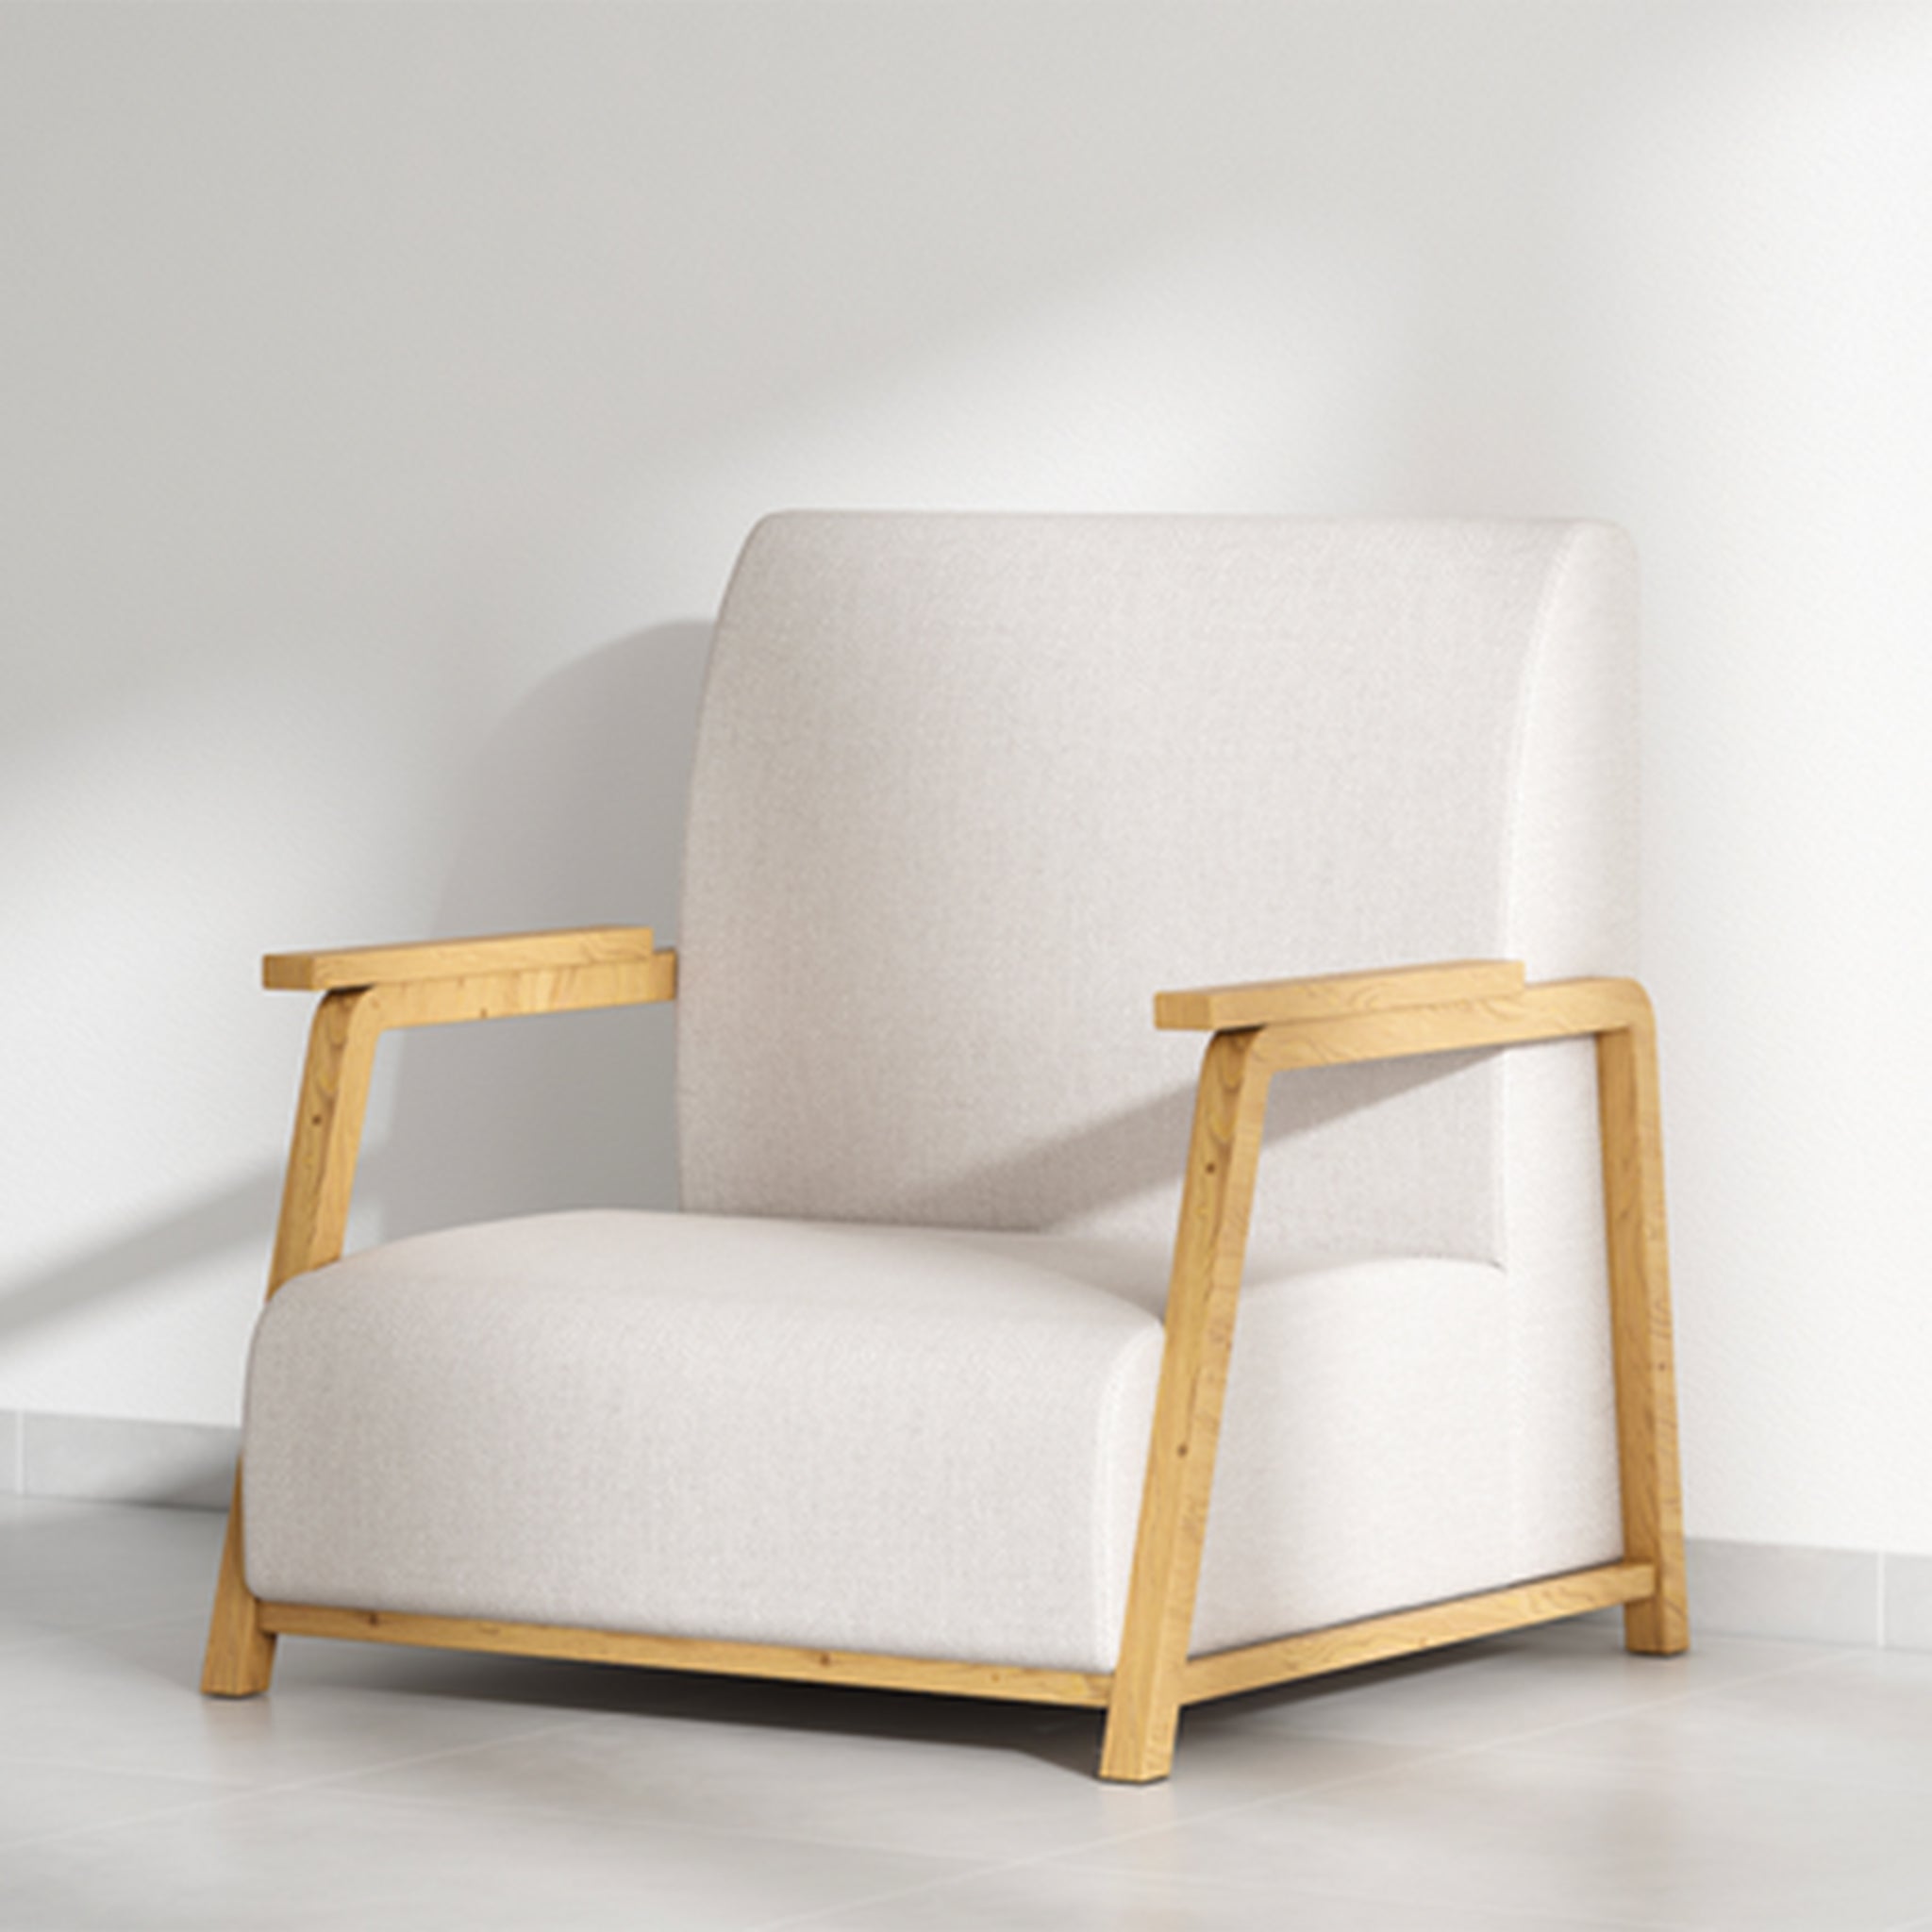 Natural wood frame The Dixon Arm Accent Chair with beige fabric.